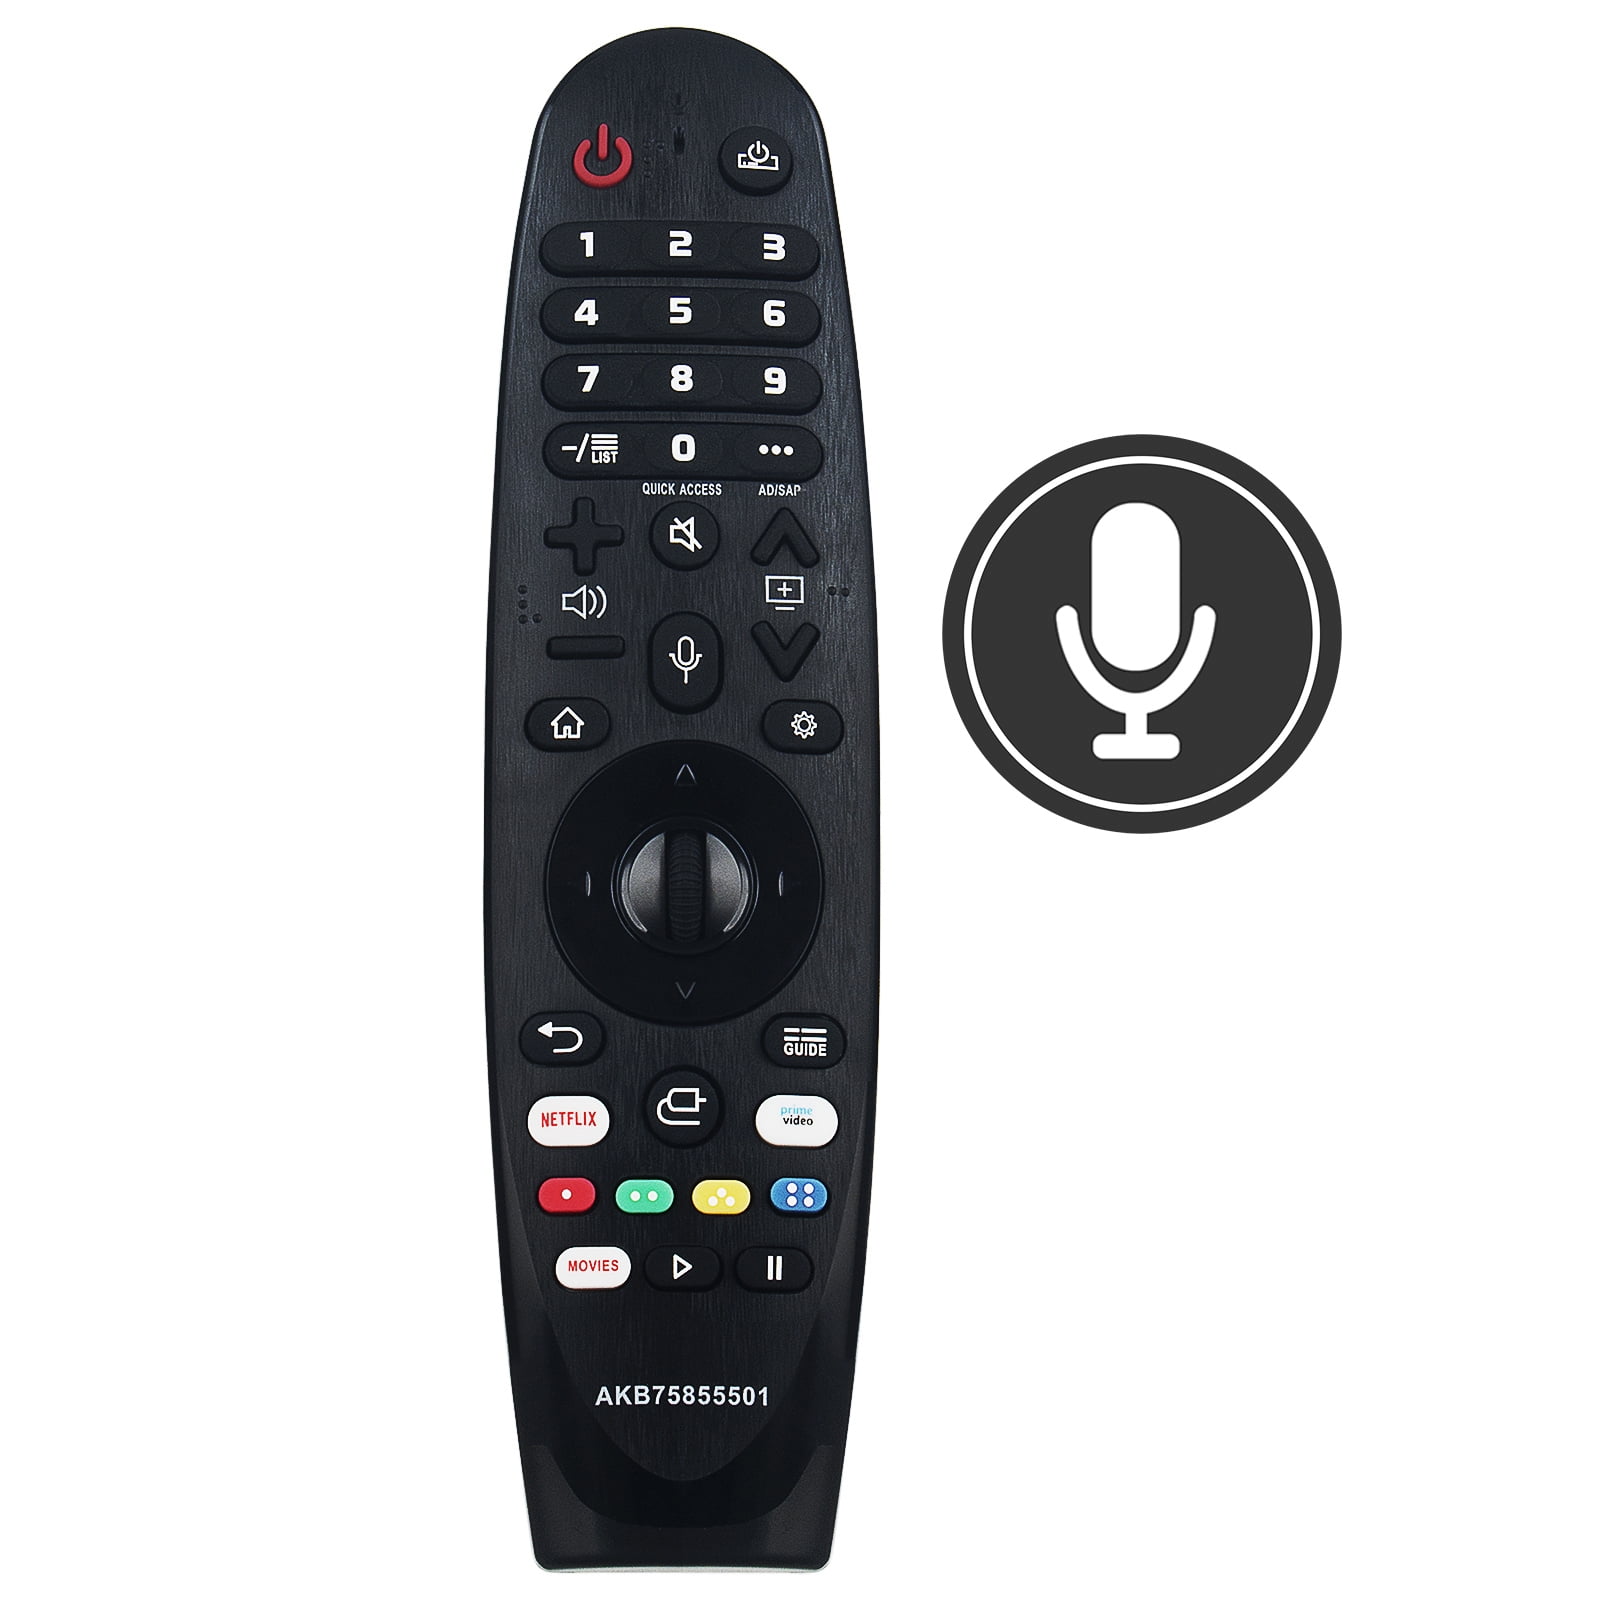 Magic Remote Control with Voice Mate™ for Select 2016 Smart TVs